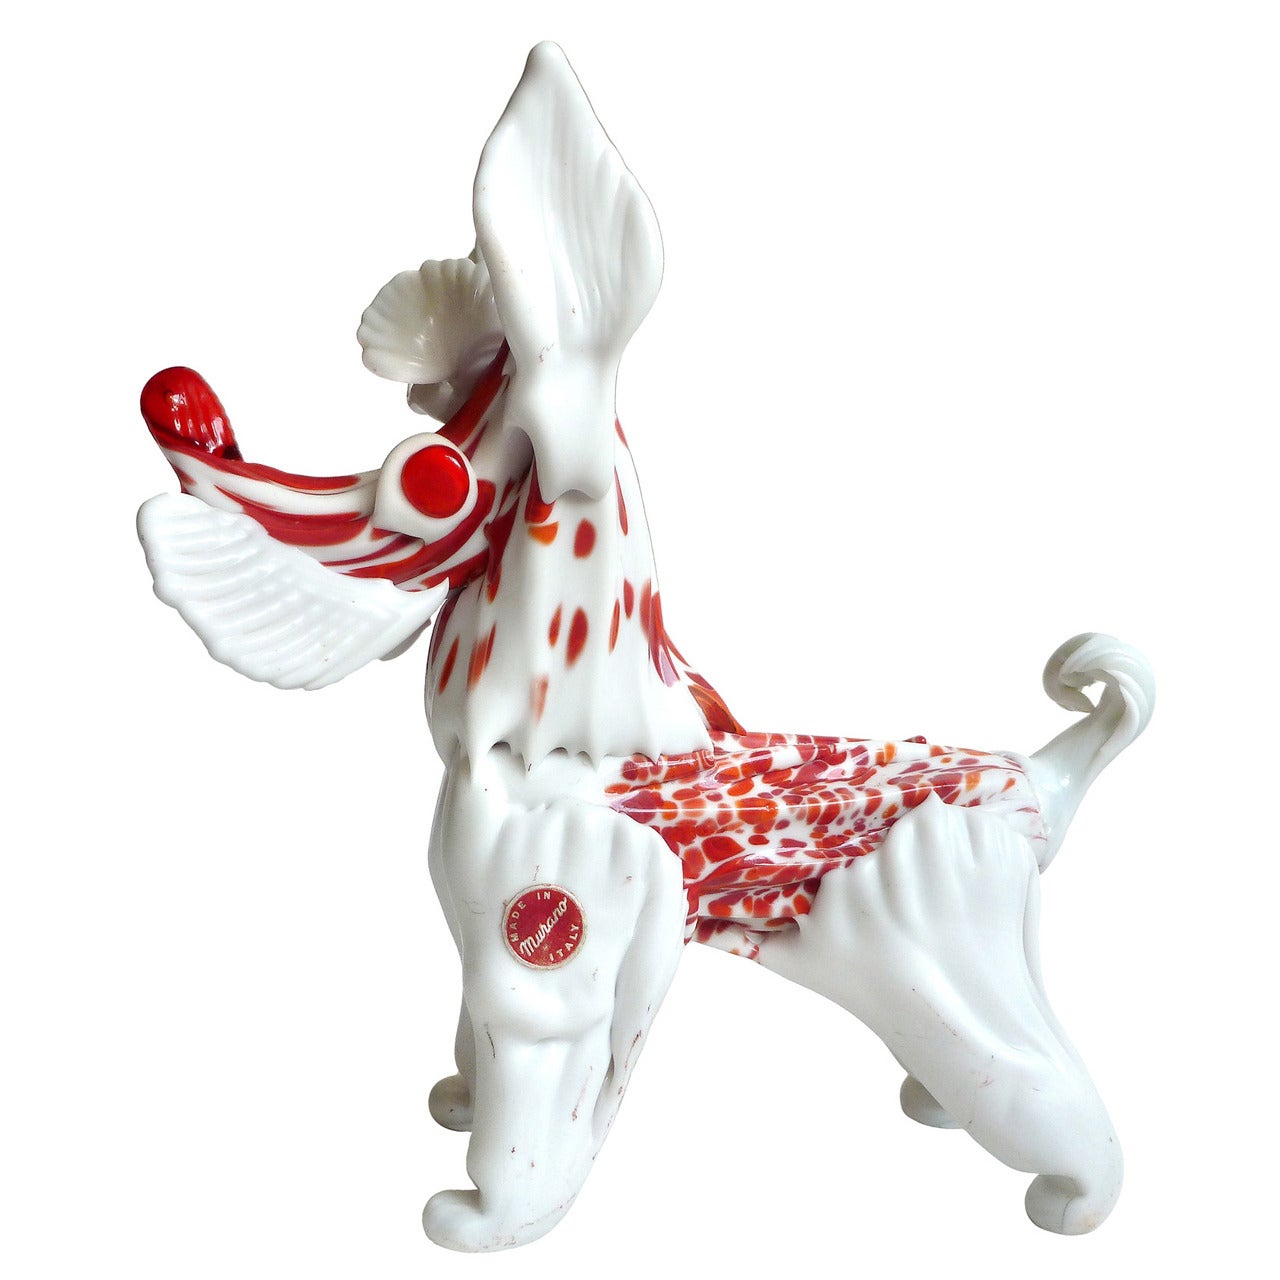 Reserved for Michele - Murano Dog Art Glass Sculpture